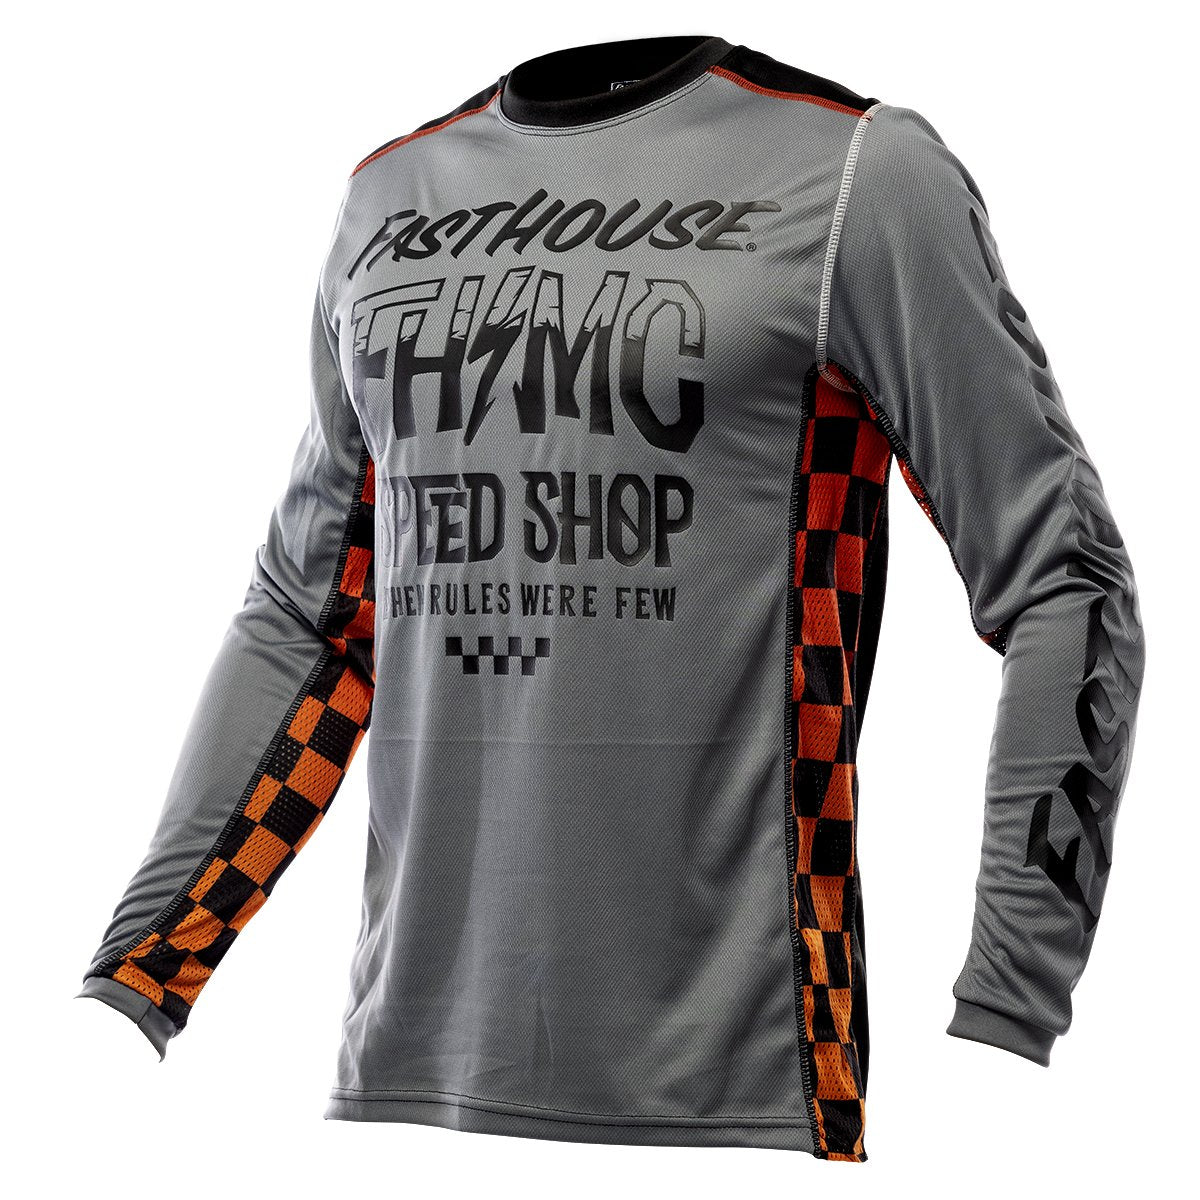 Grindhouse Brute Jersey - Gray/Black